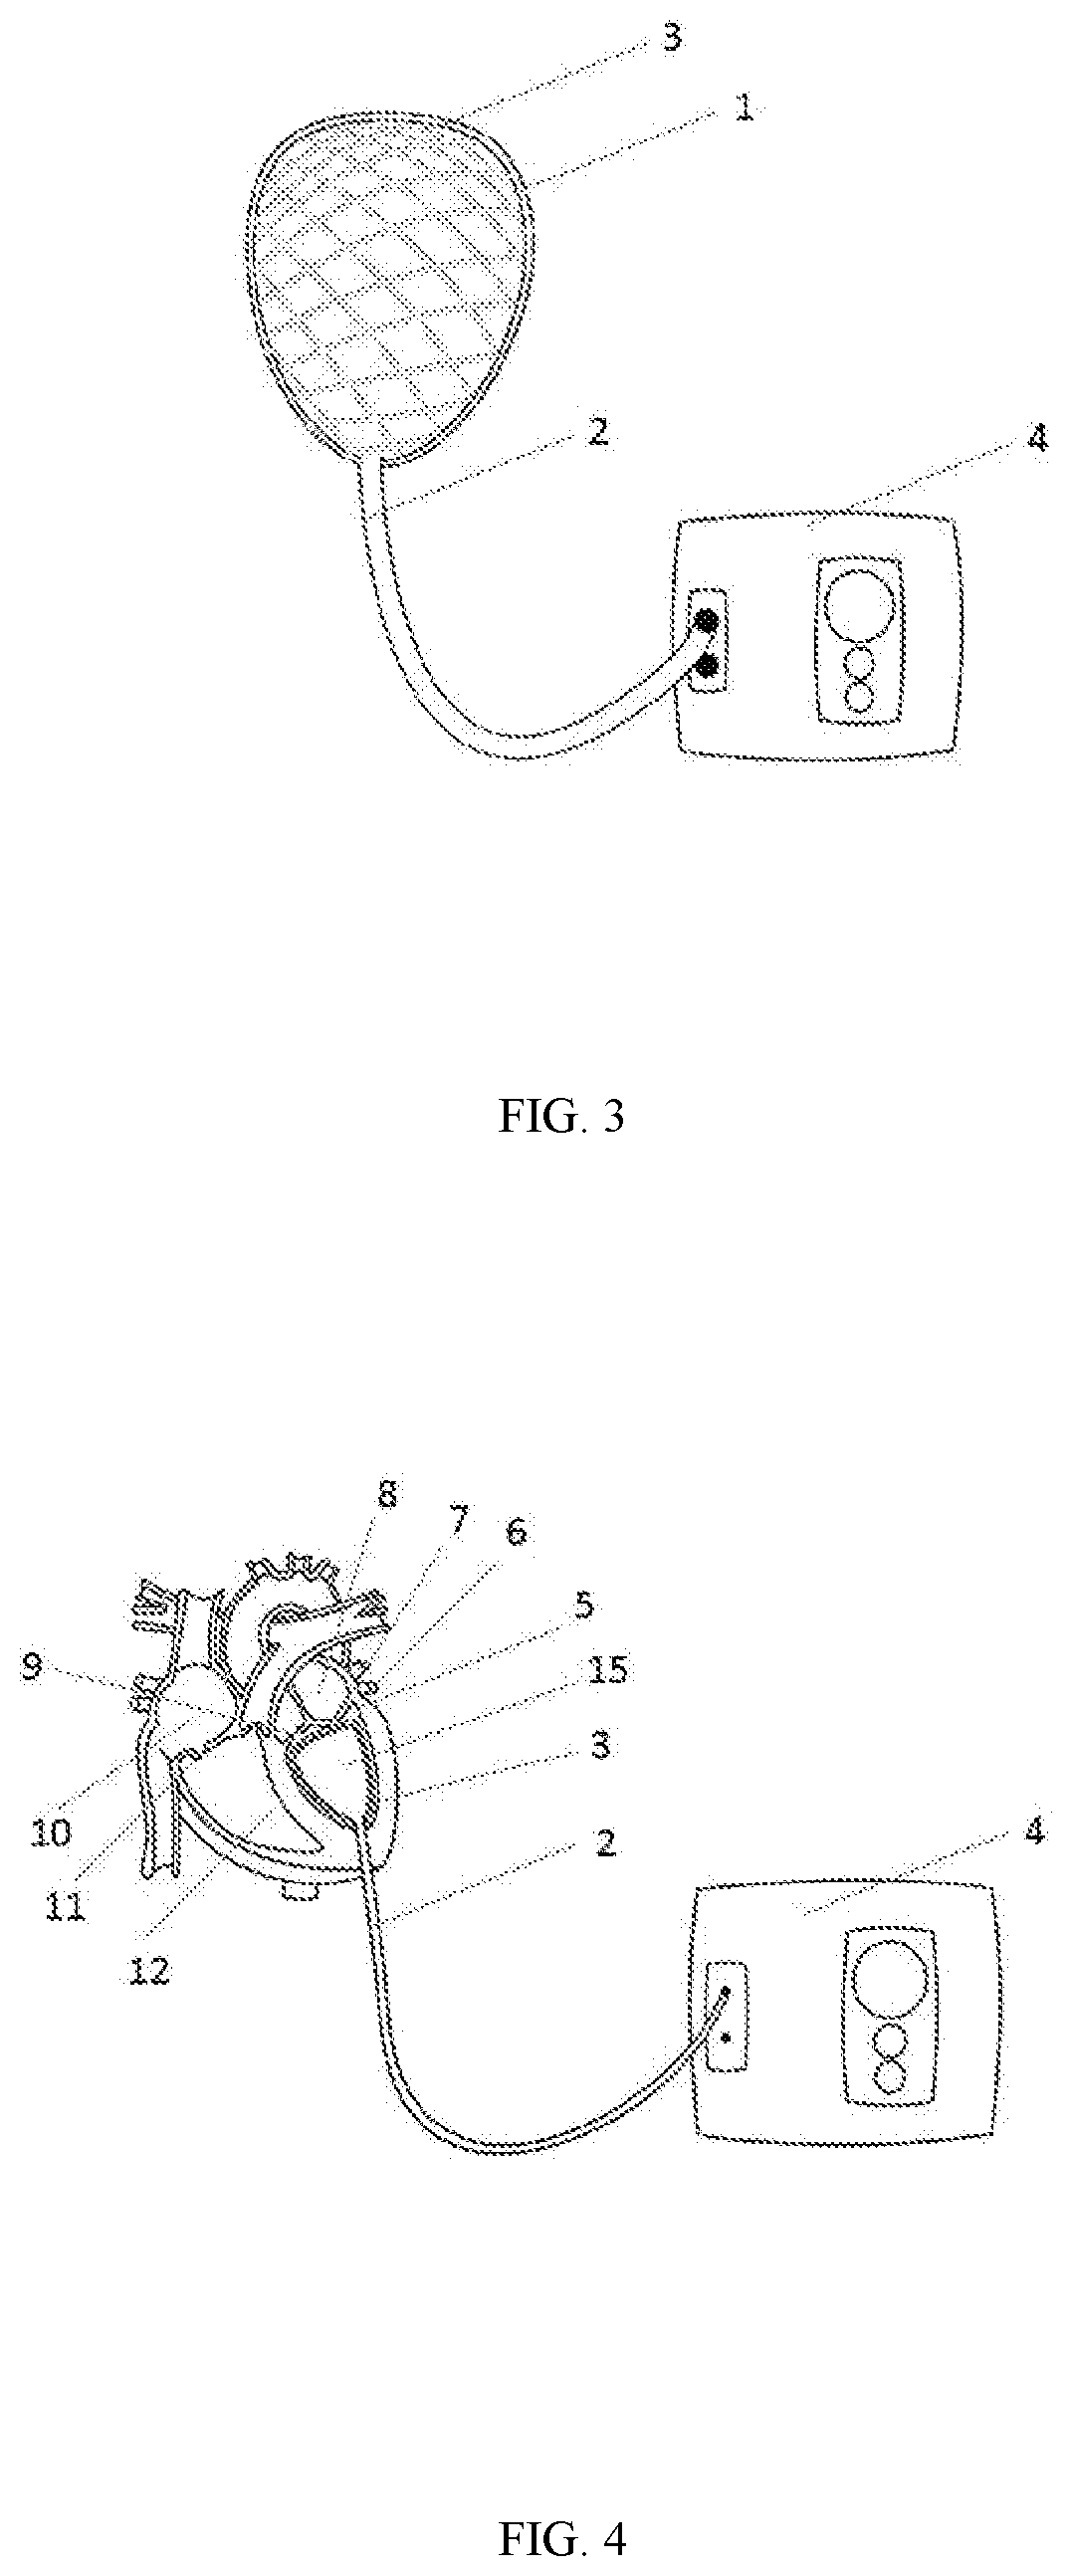 Implantable ventricular assist device